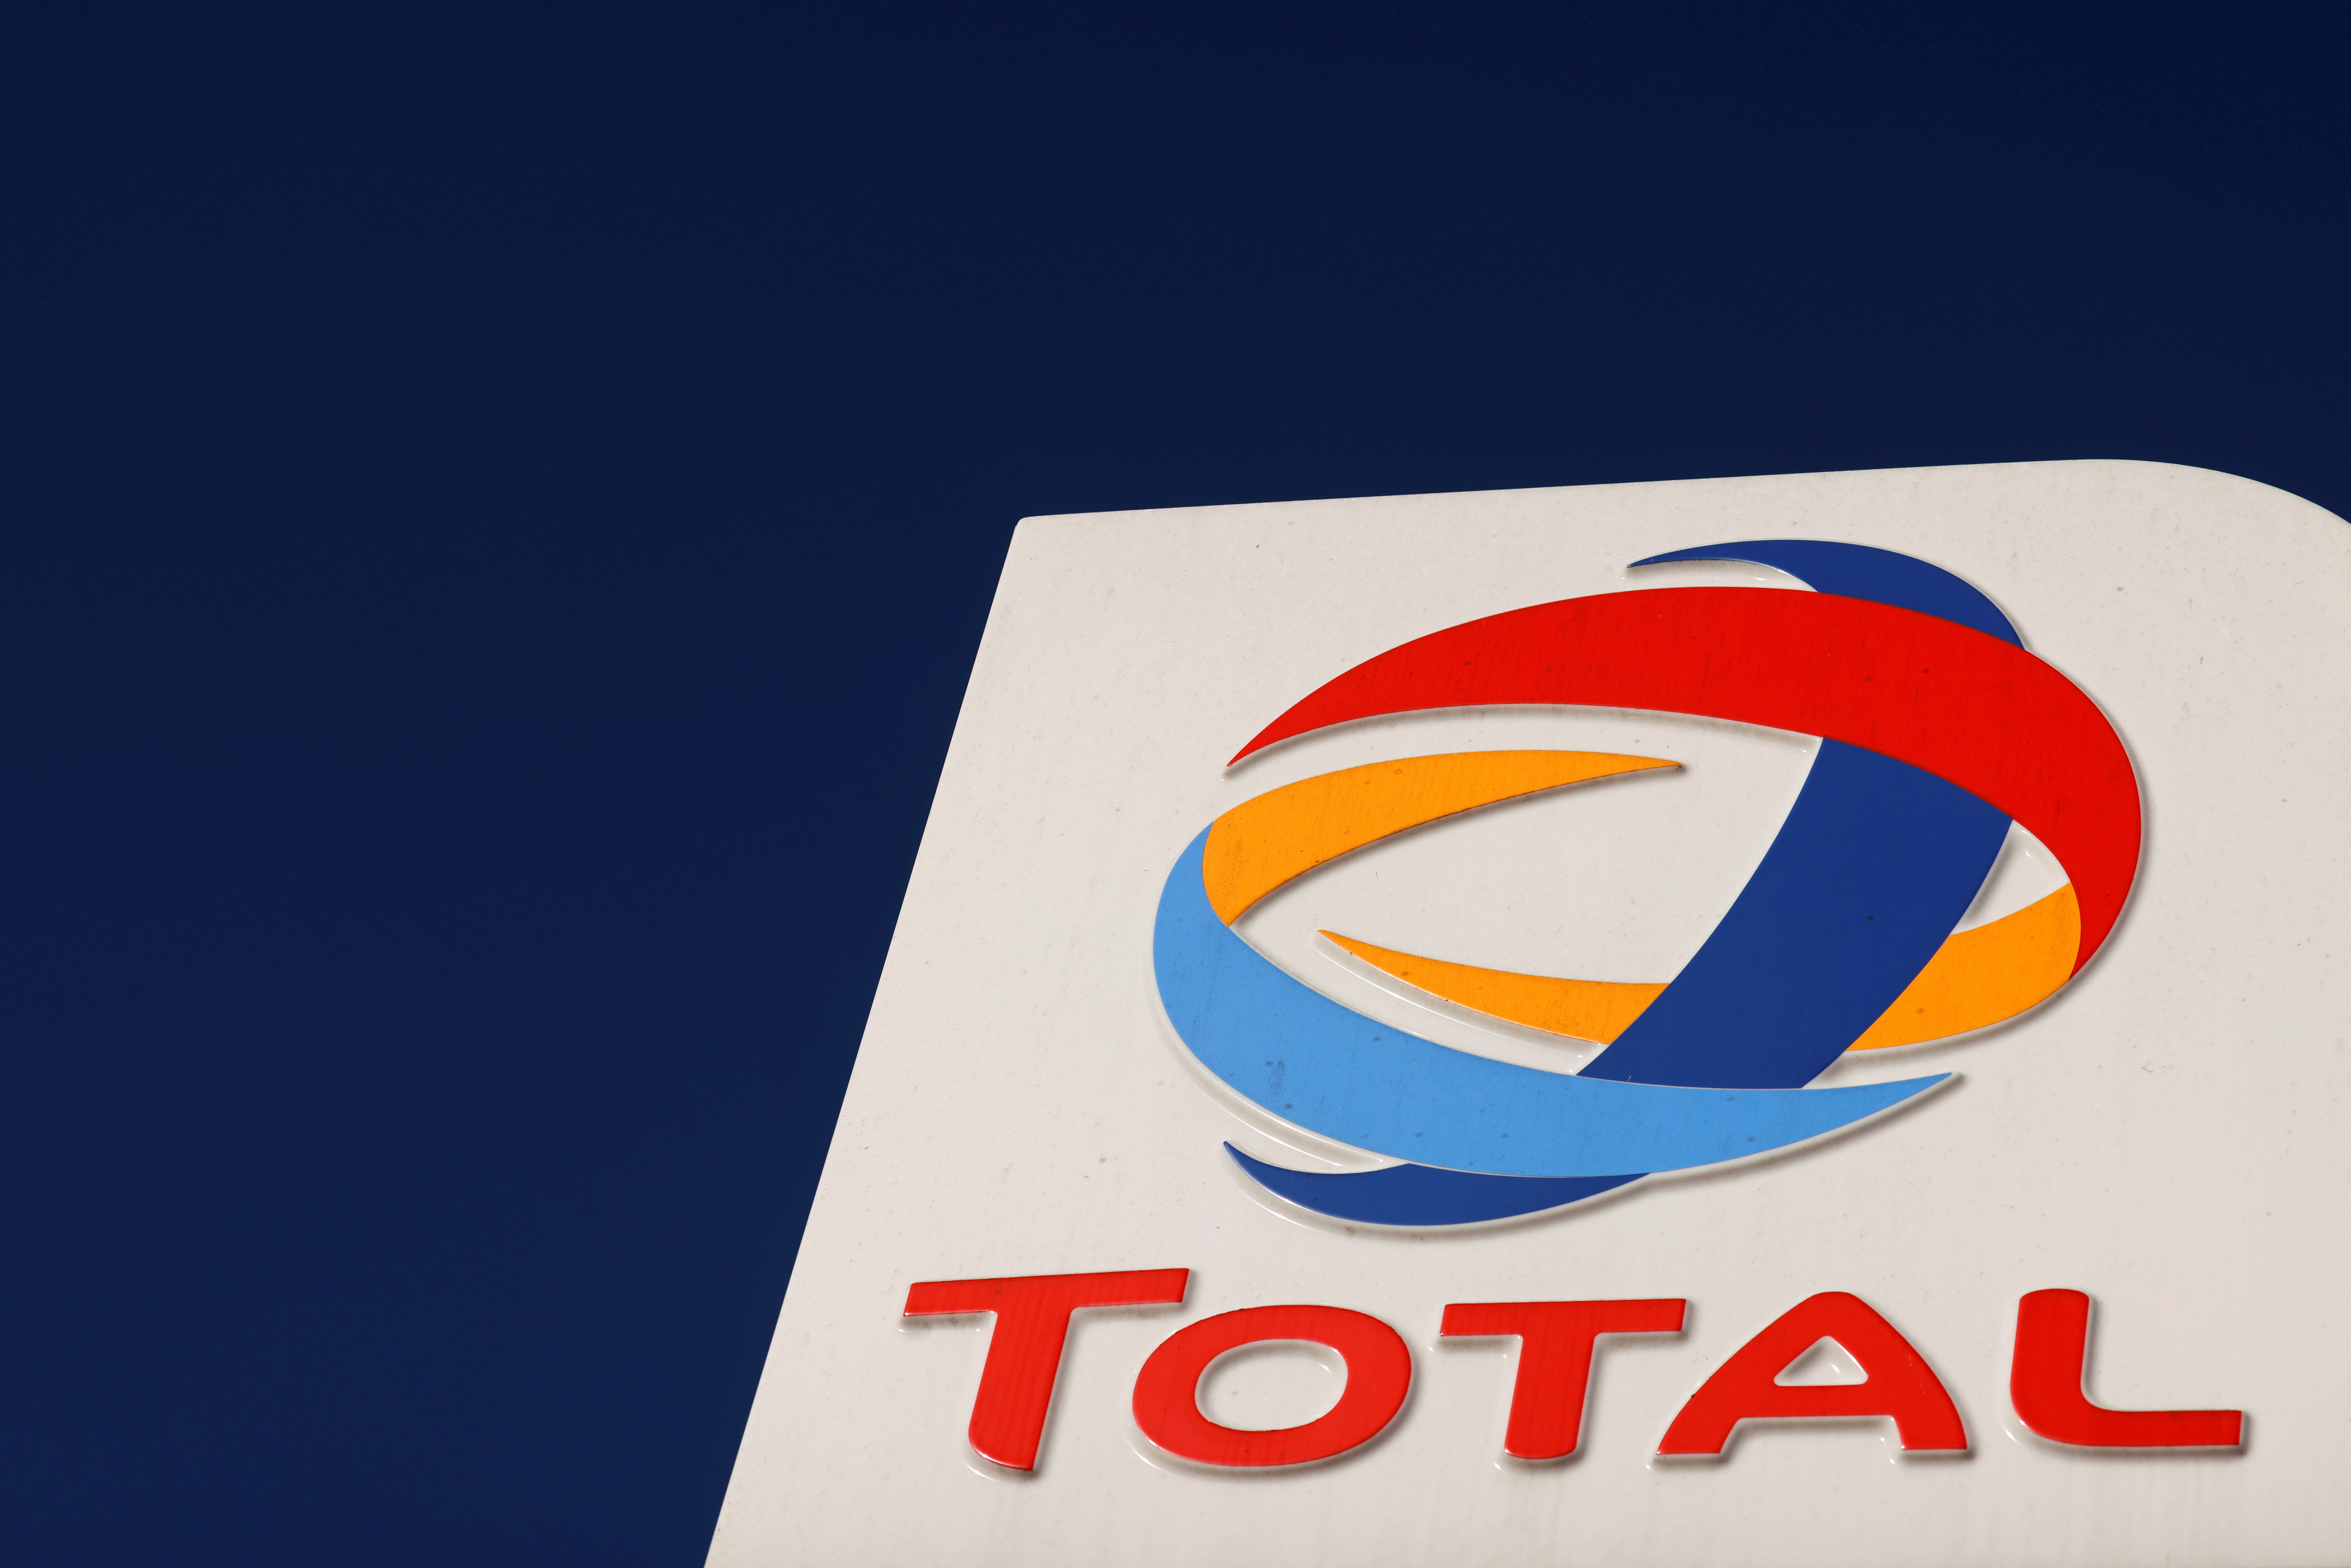 The logo of French oil and gas company Total is seen at a petrol station in Neuville Saint Remy, France, October 1, 2020. REUTERS/Pascal Rossignol/File Photo